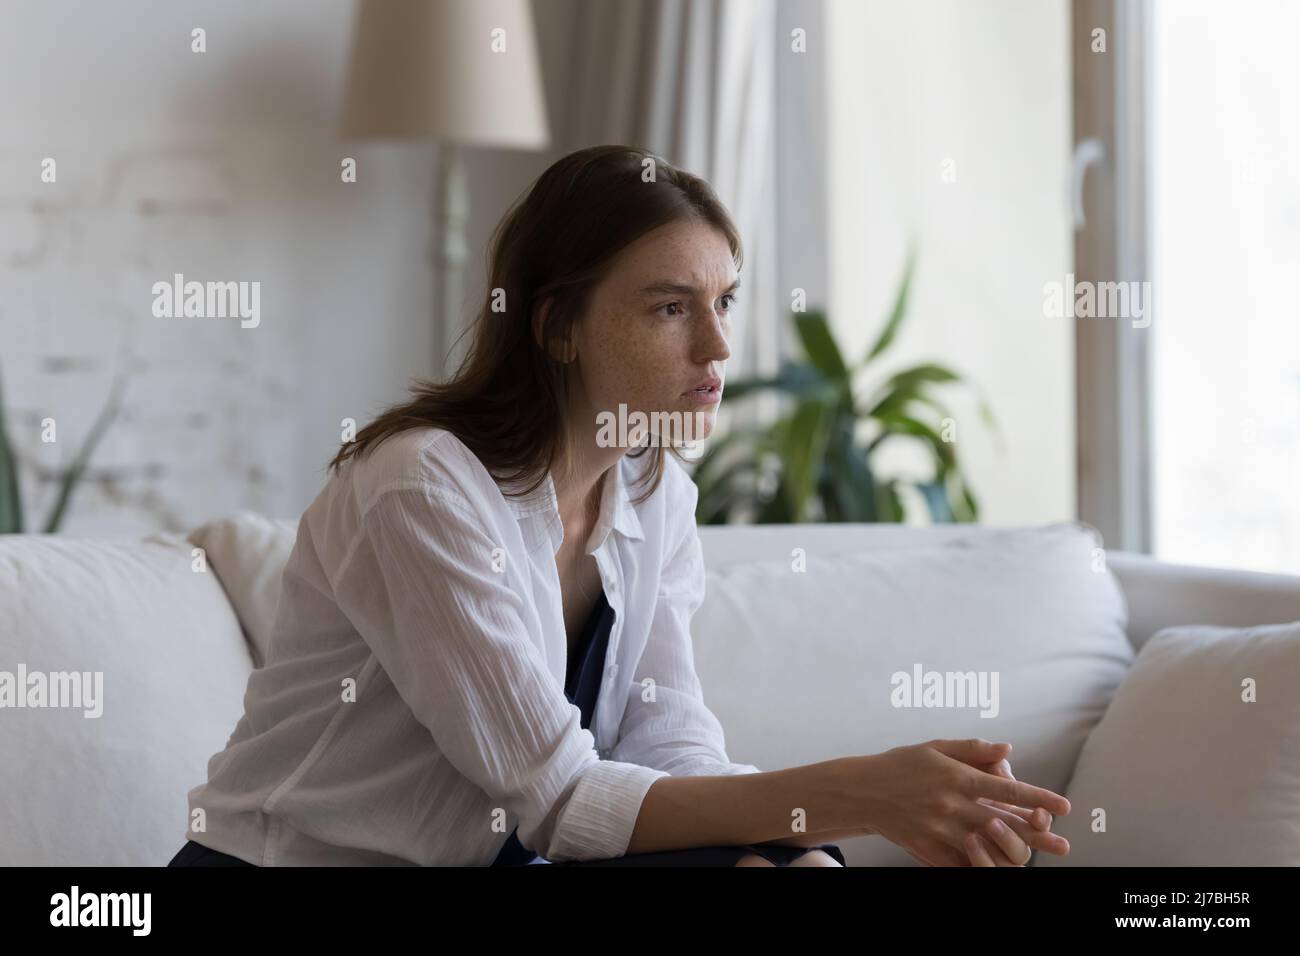 Concerned nervous young woman suffering from anxiety disorder Stock Photo